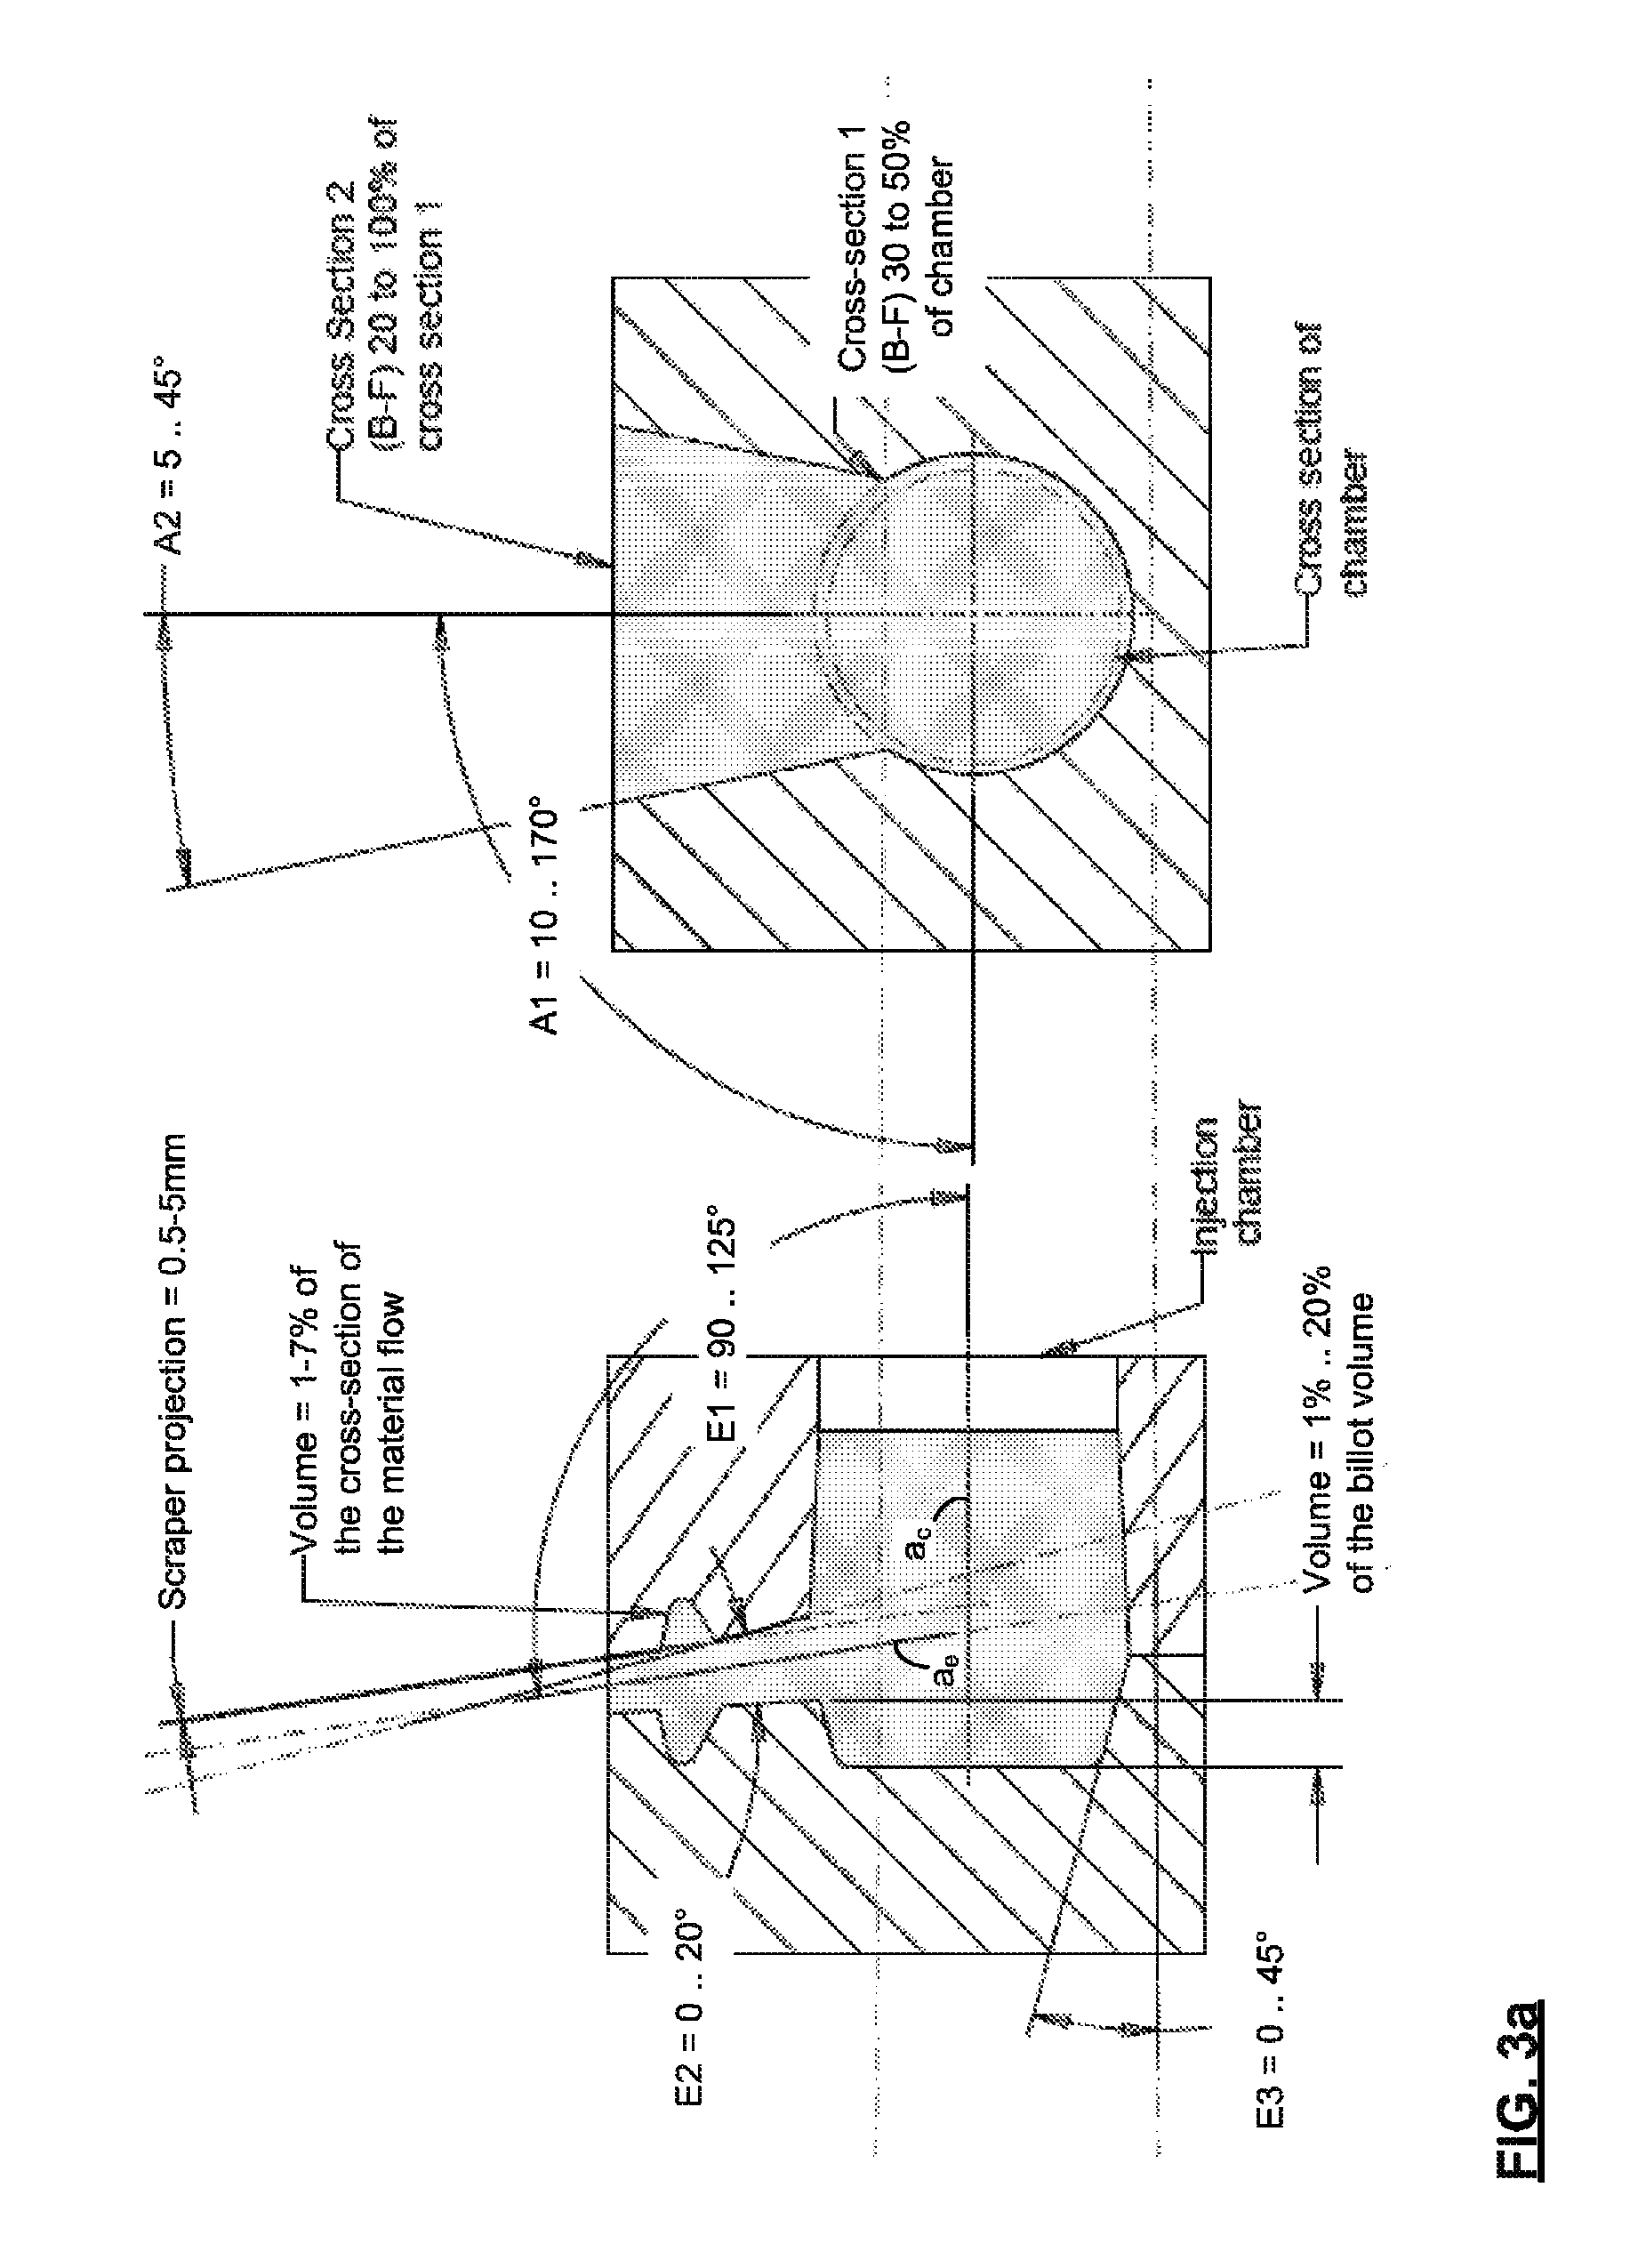 Feeding system for semi-solid metal injection